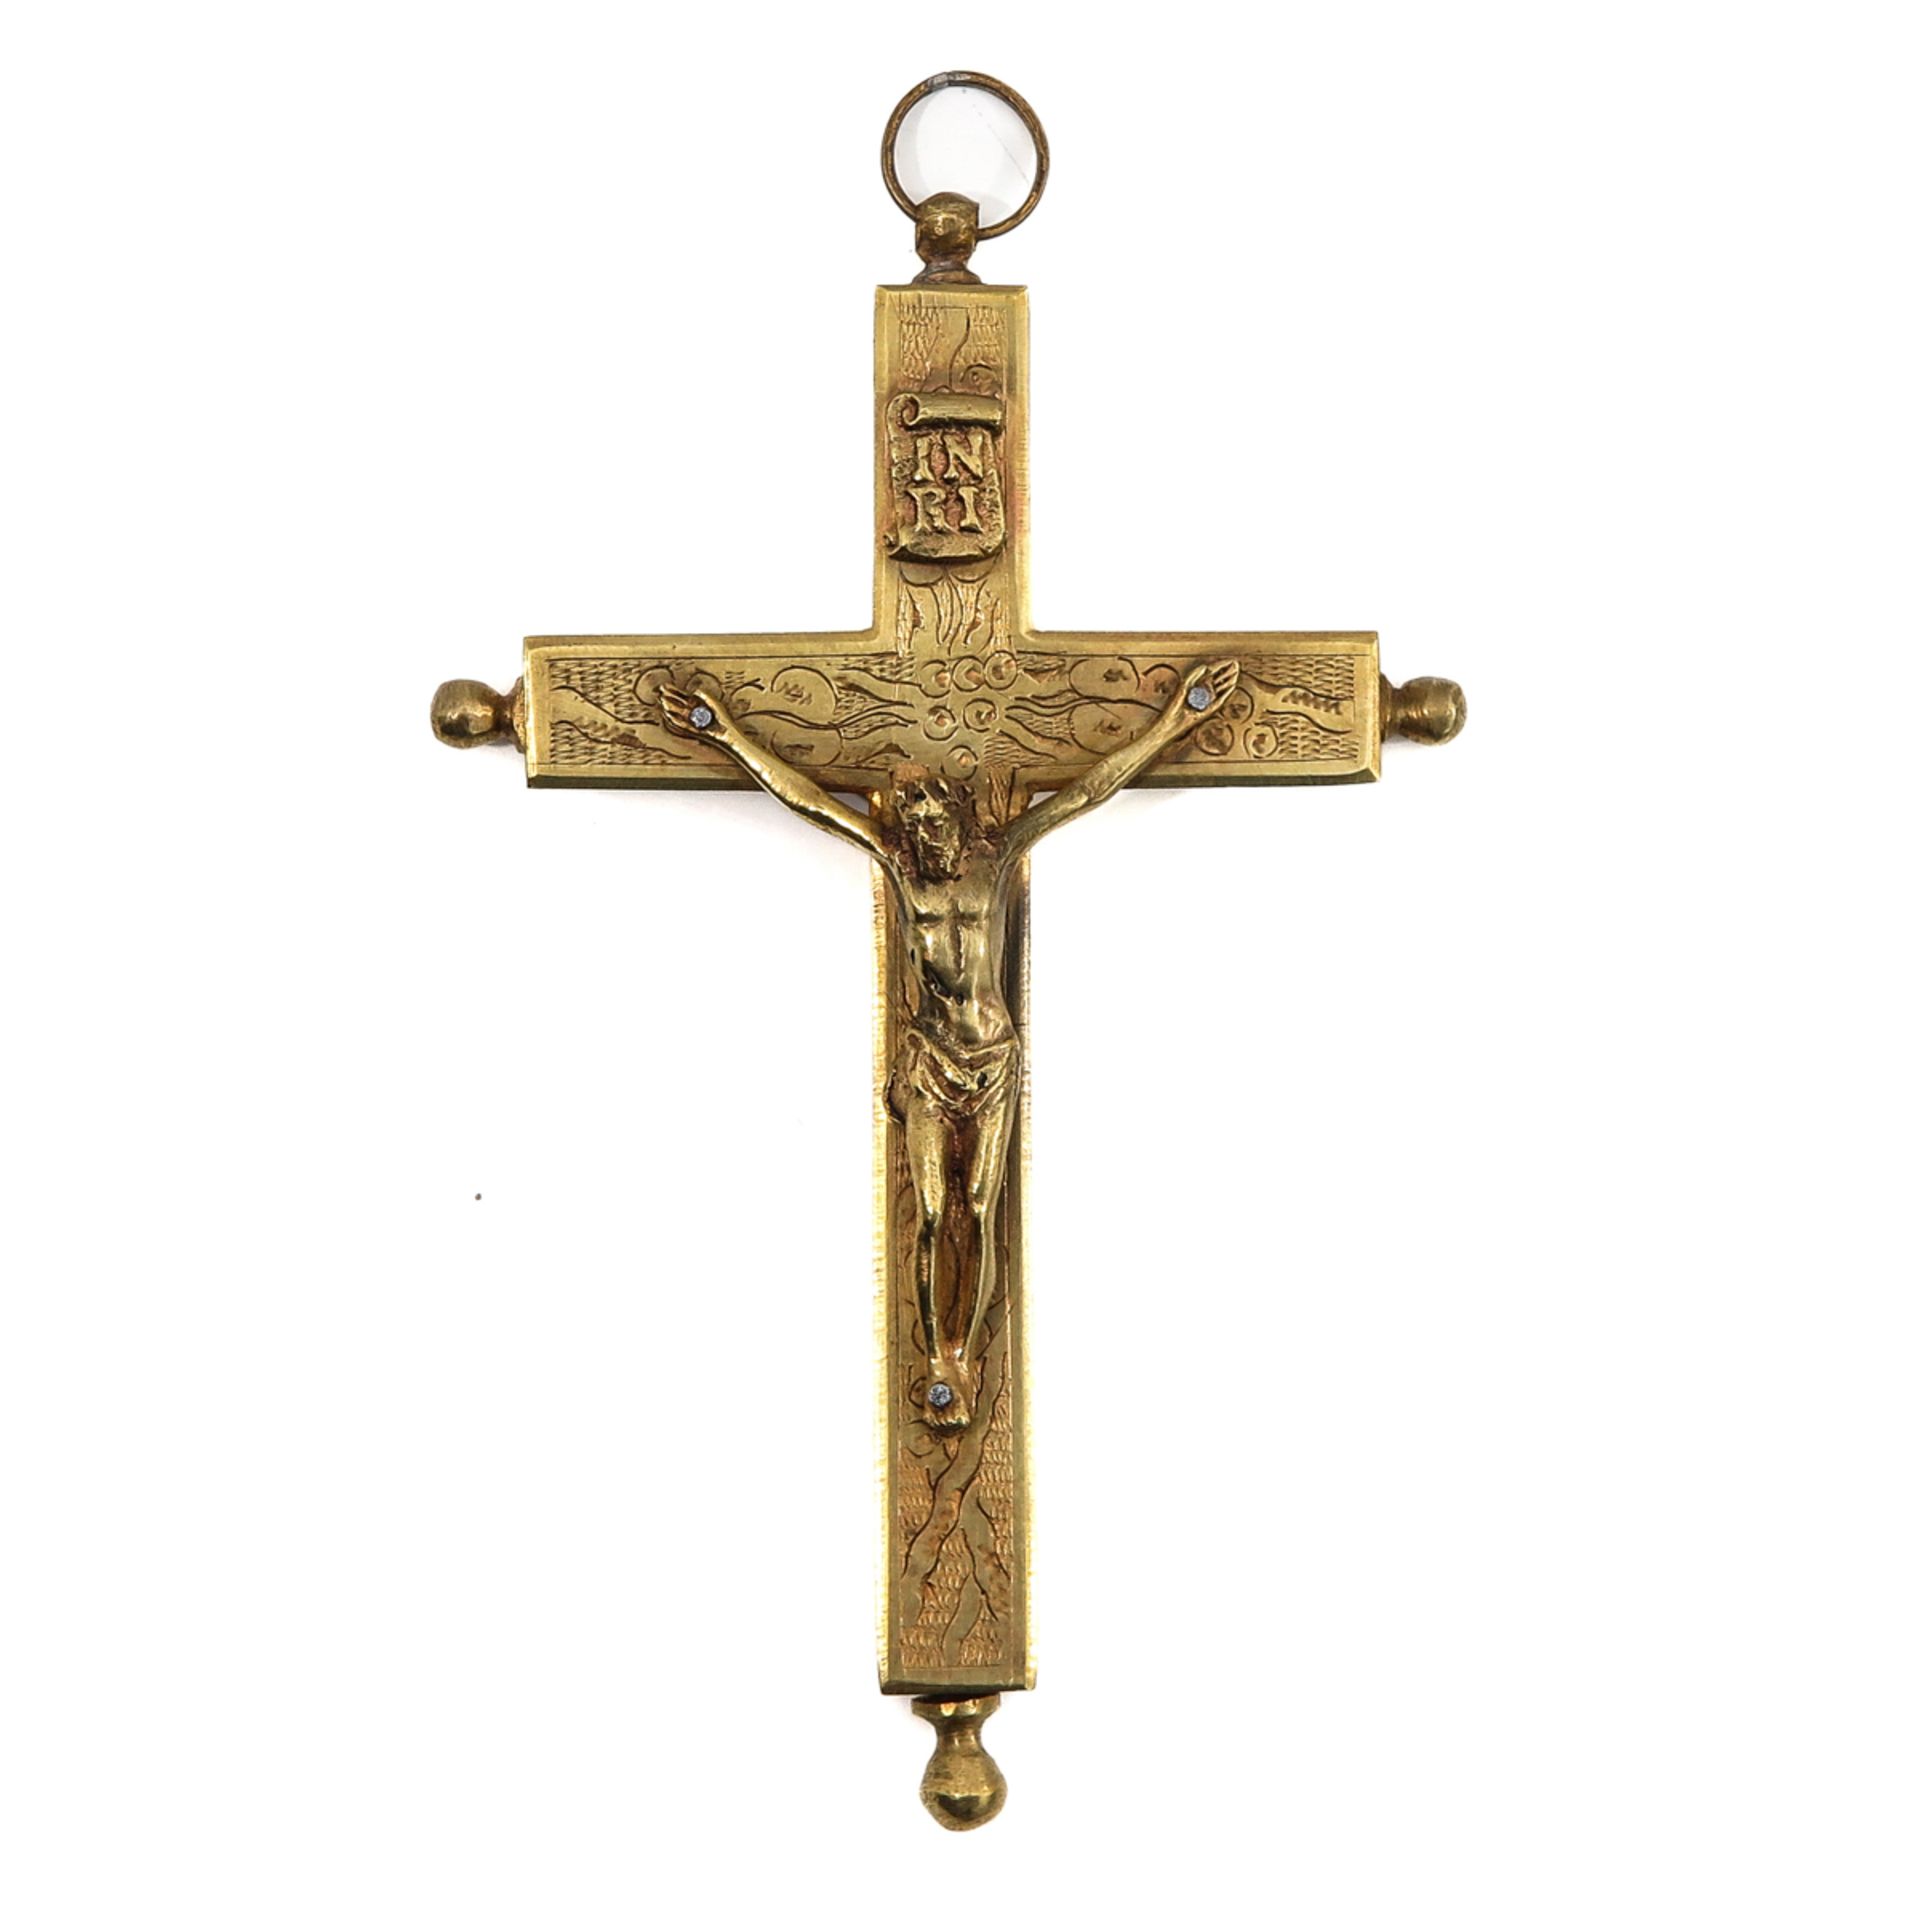 A Relic Cross Including 5 Relics with Certificate